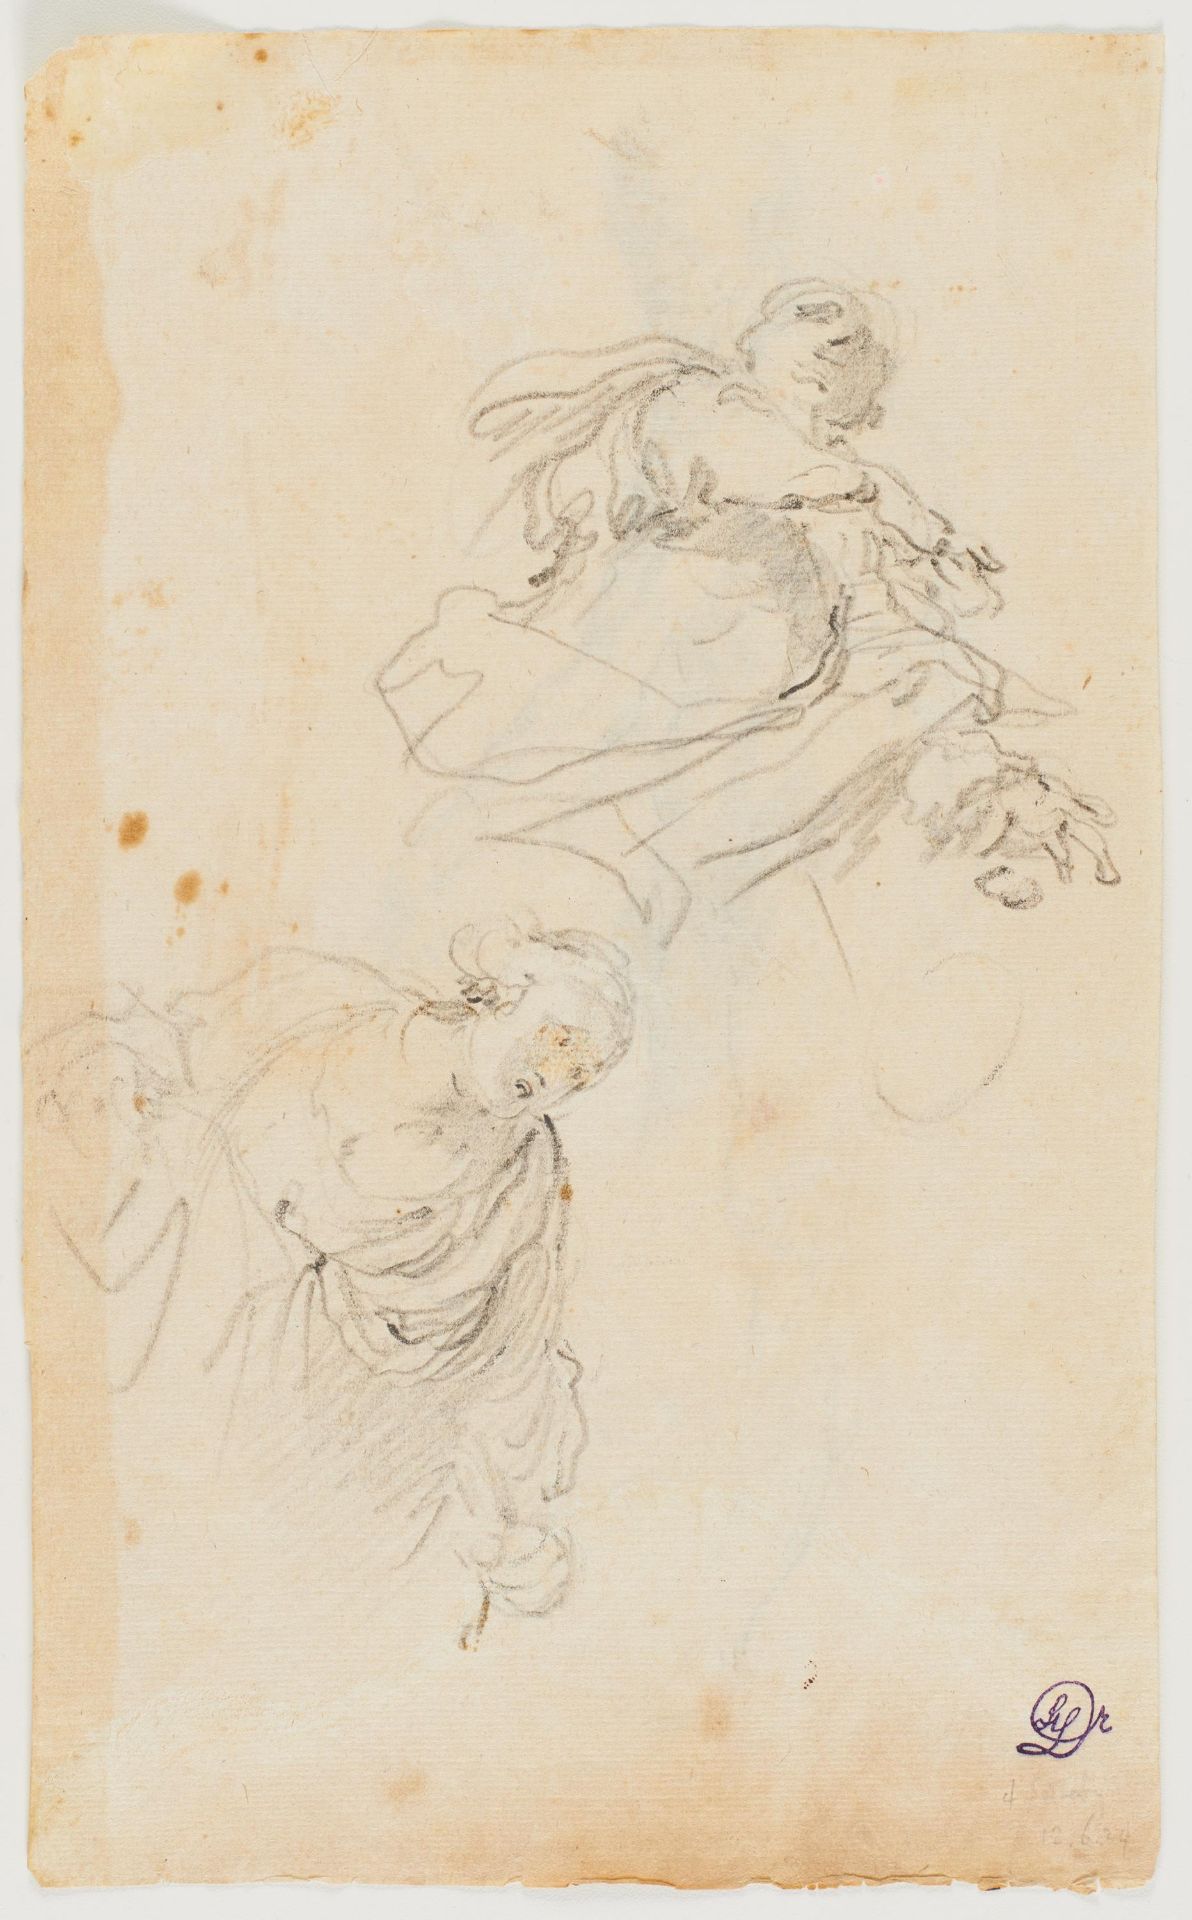 Sienese School: Sketch with Male Nude - Image 3 of 3